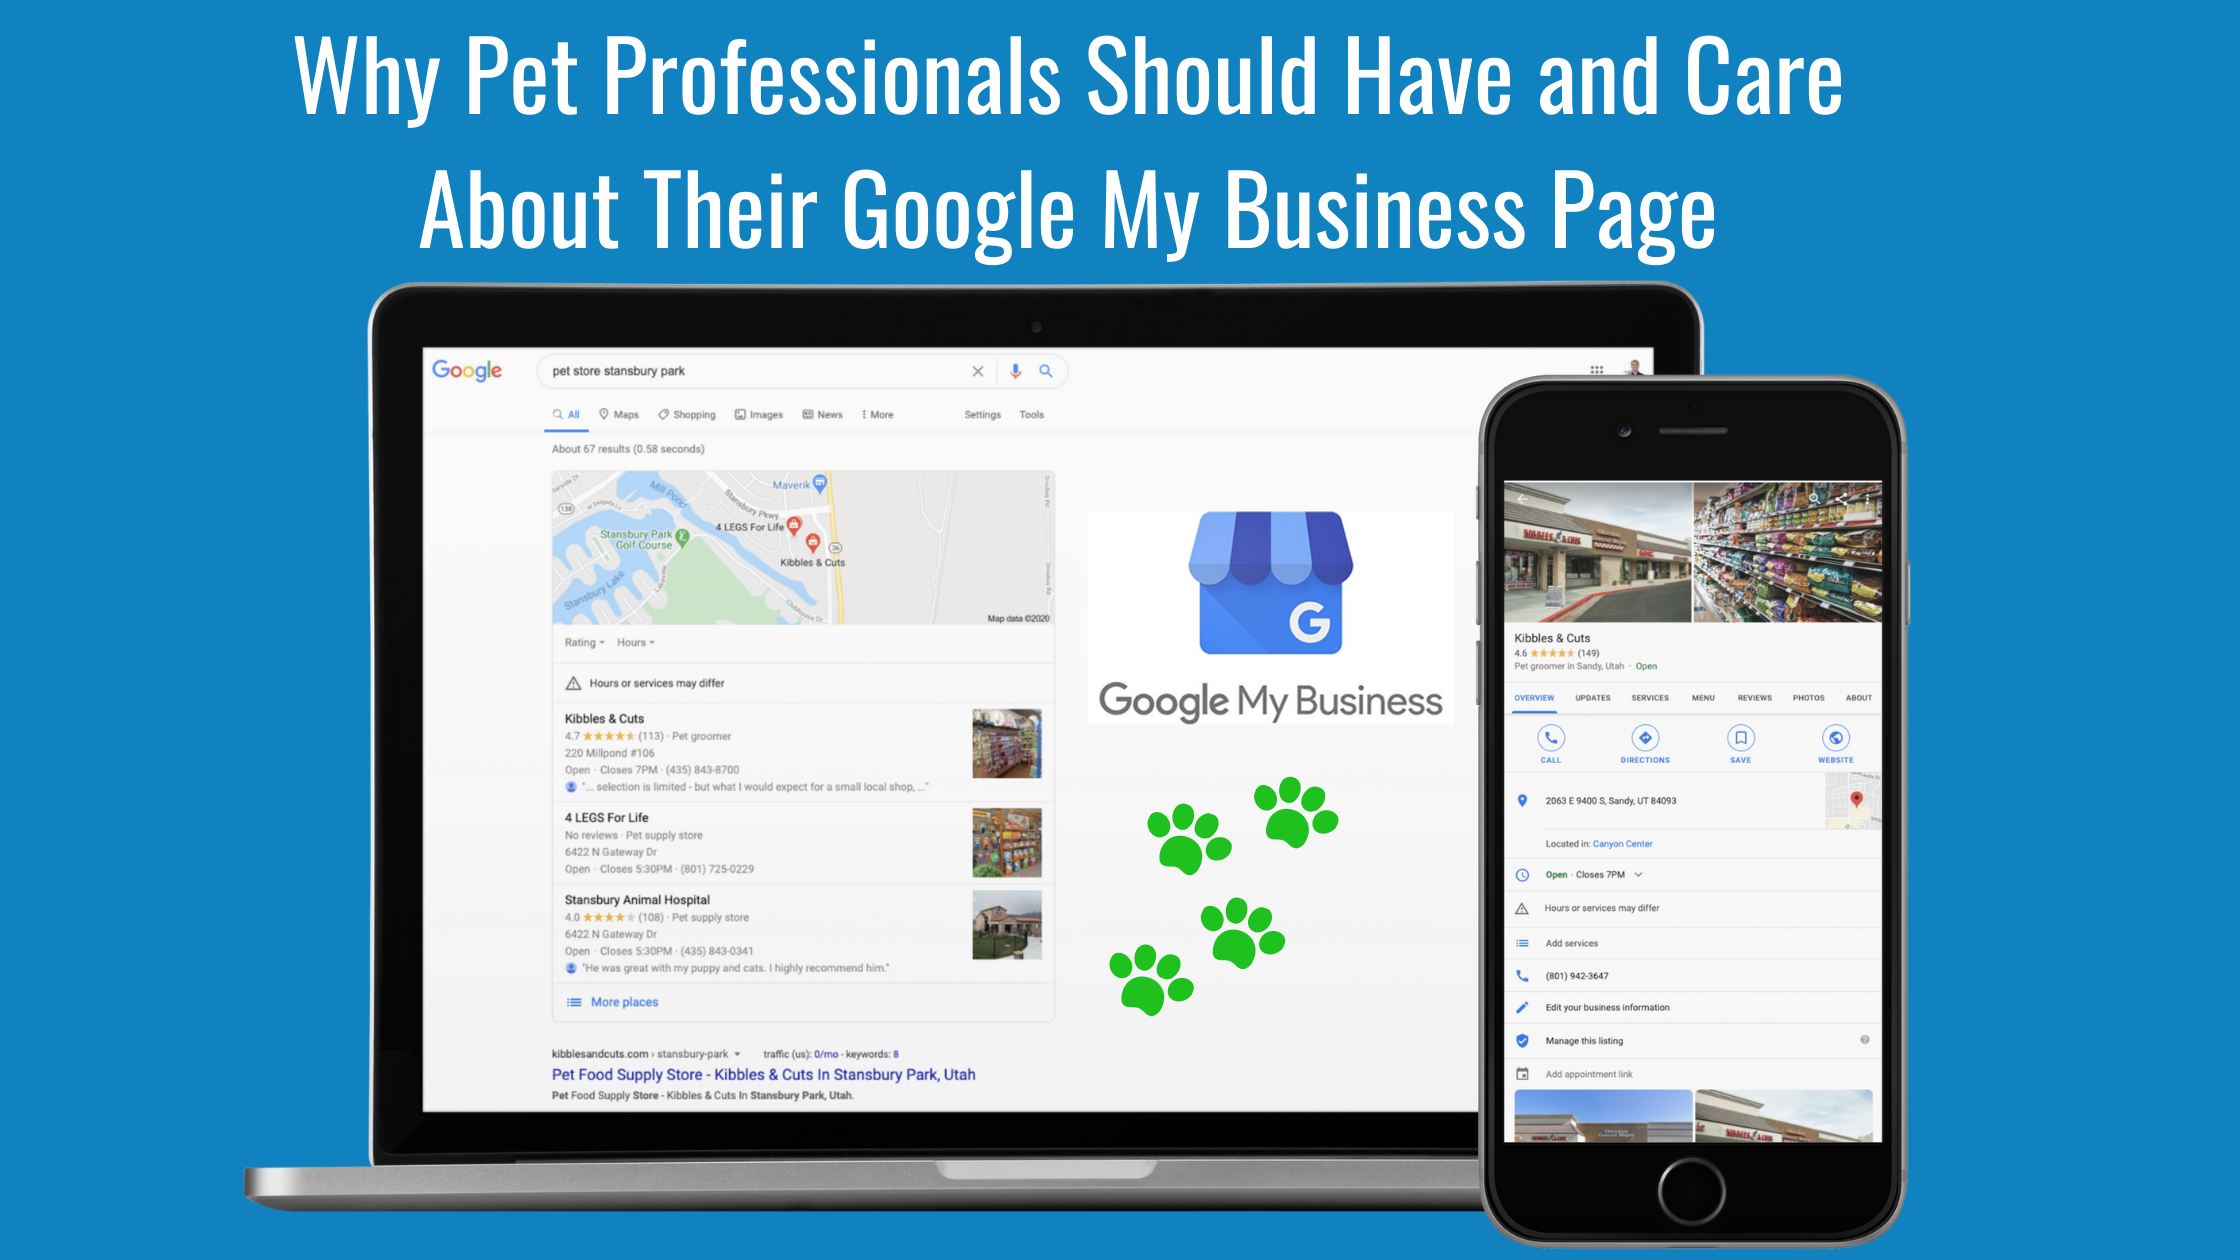 Why Pet Retailers Should Have and Care About Their Google My Business Page